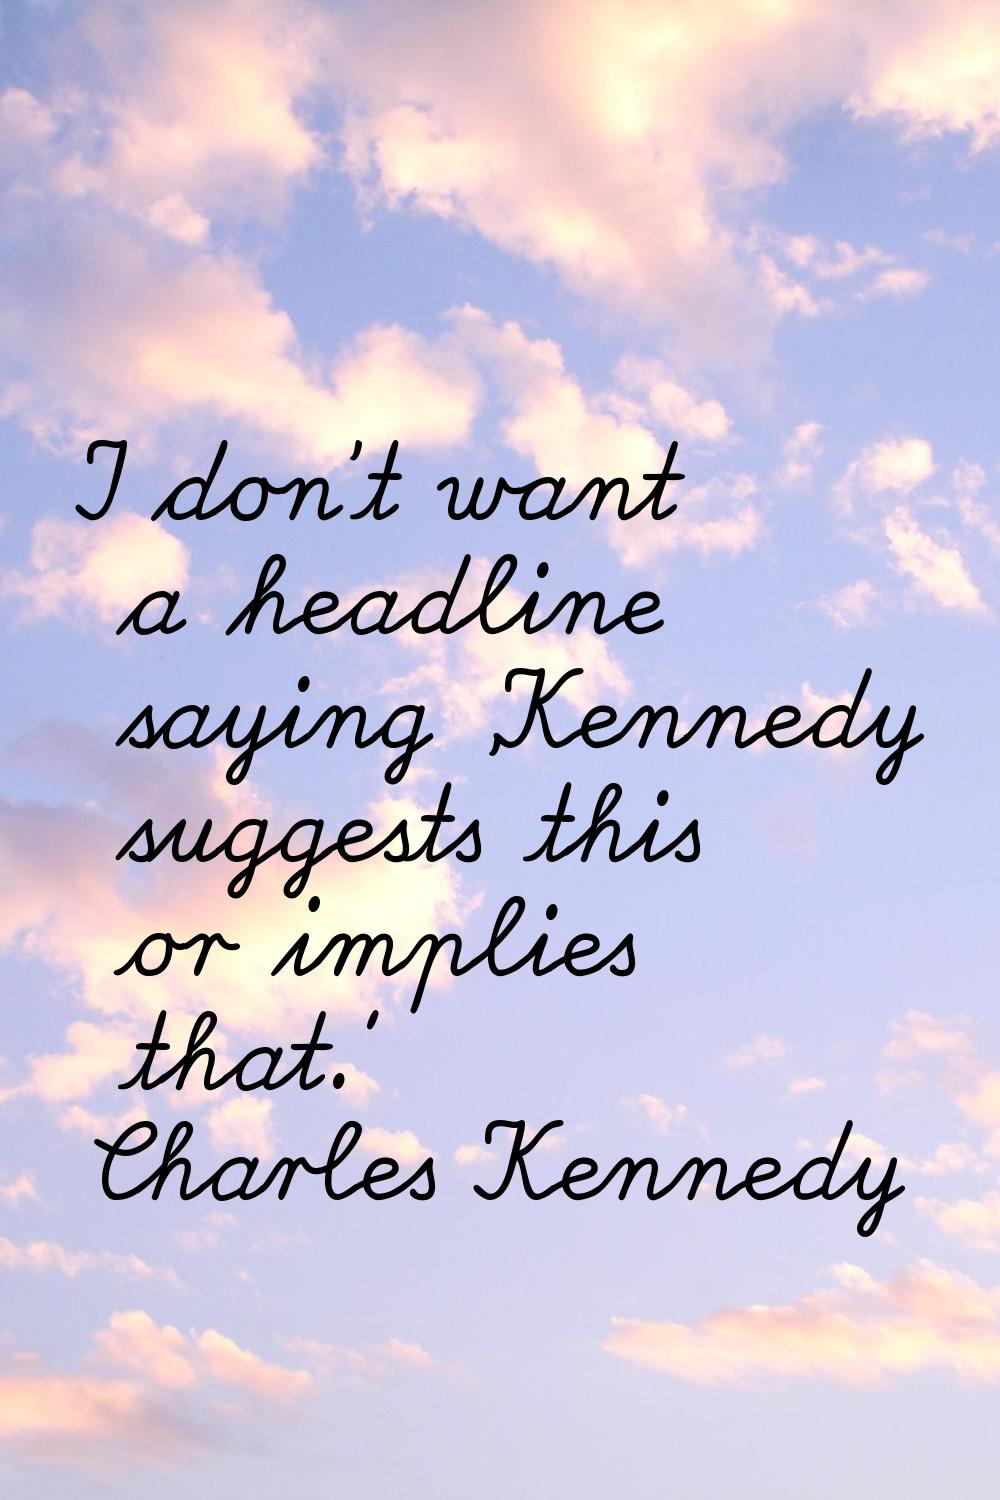 I don't want a headline saying 'Kennedy suggests this or implies that.'